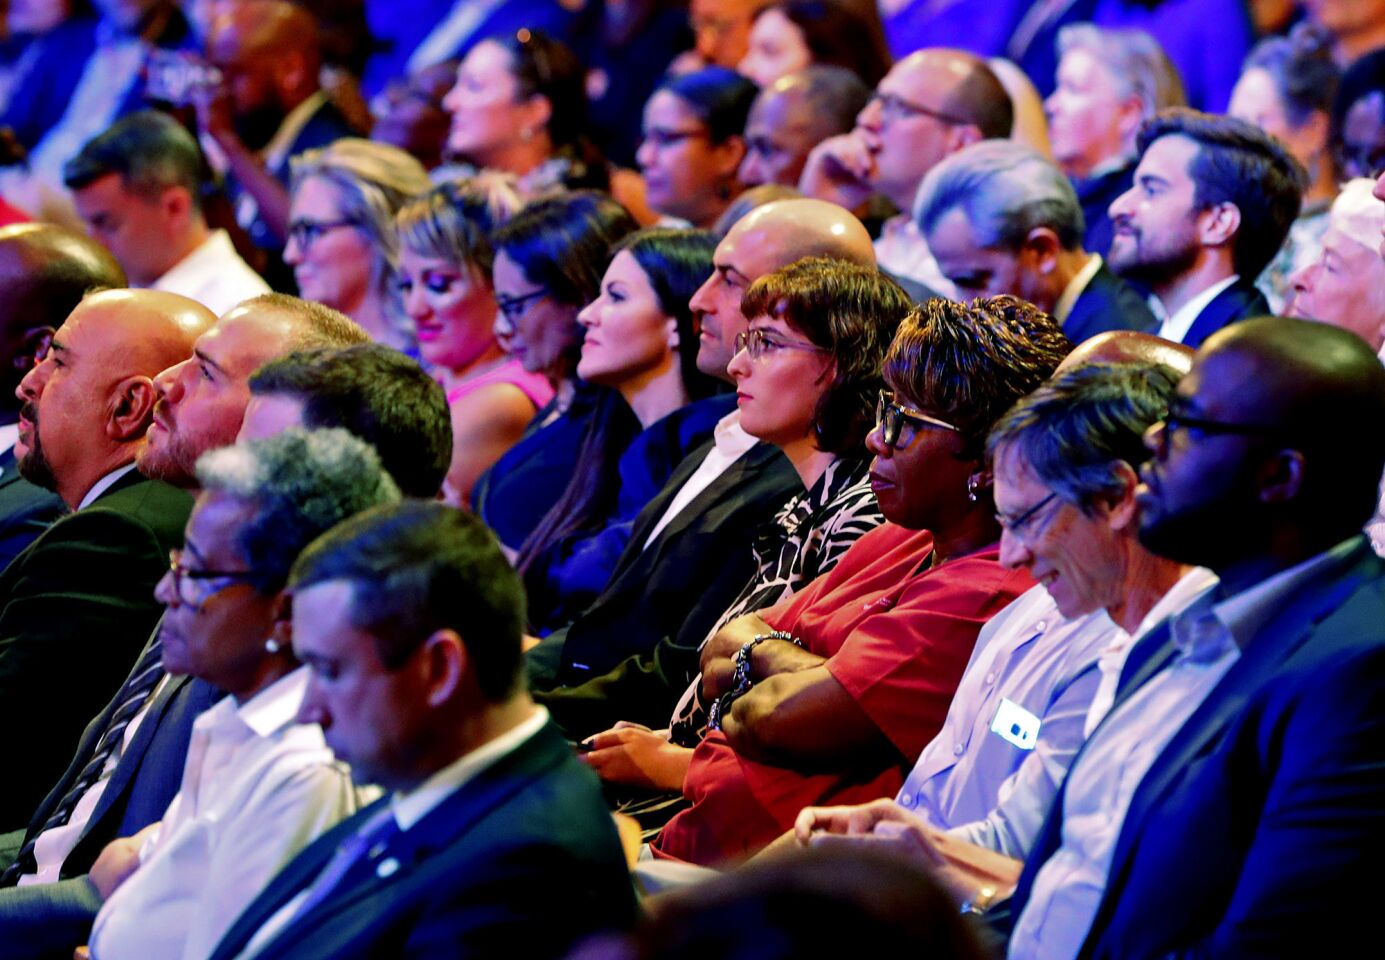 Members of the audience listen to a Democratic primary debate hosted by NBC News at the Adrienne Arsht Center for the Performing Art, Wednesday, June 26, 2019, in Miami.